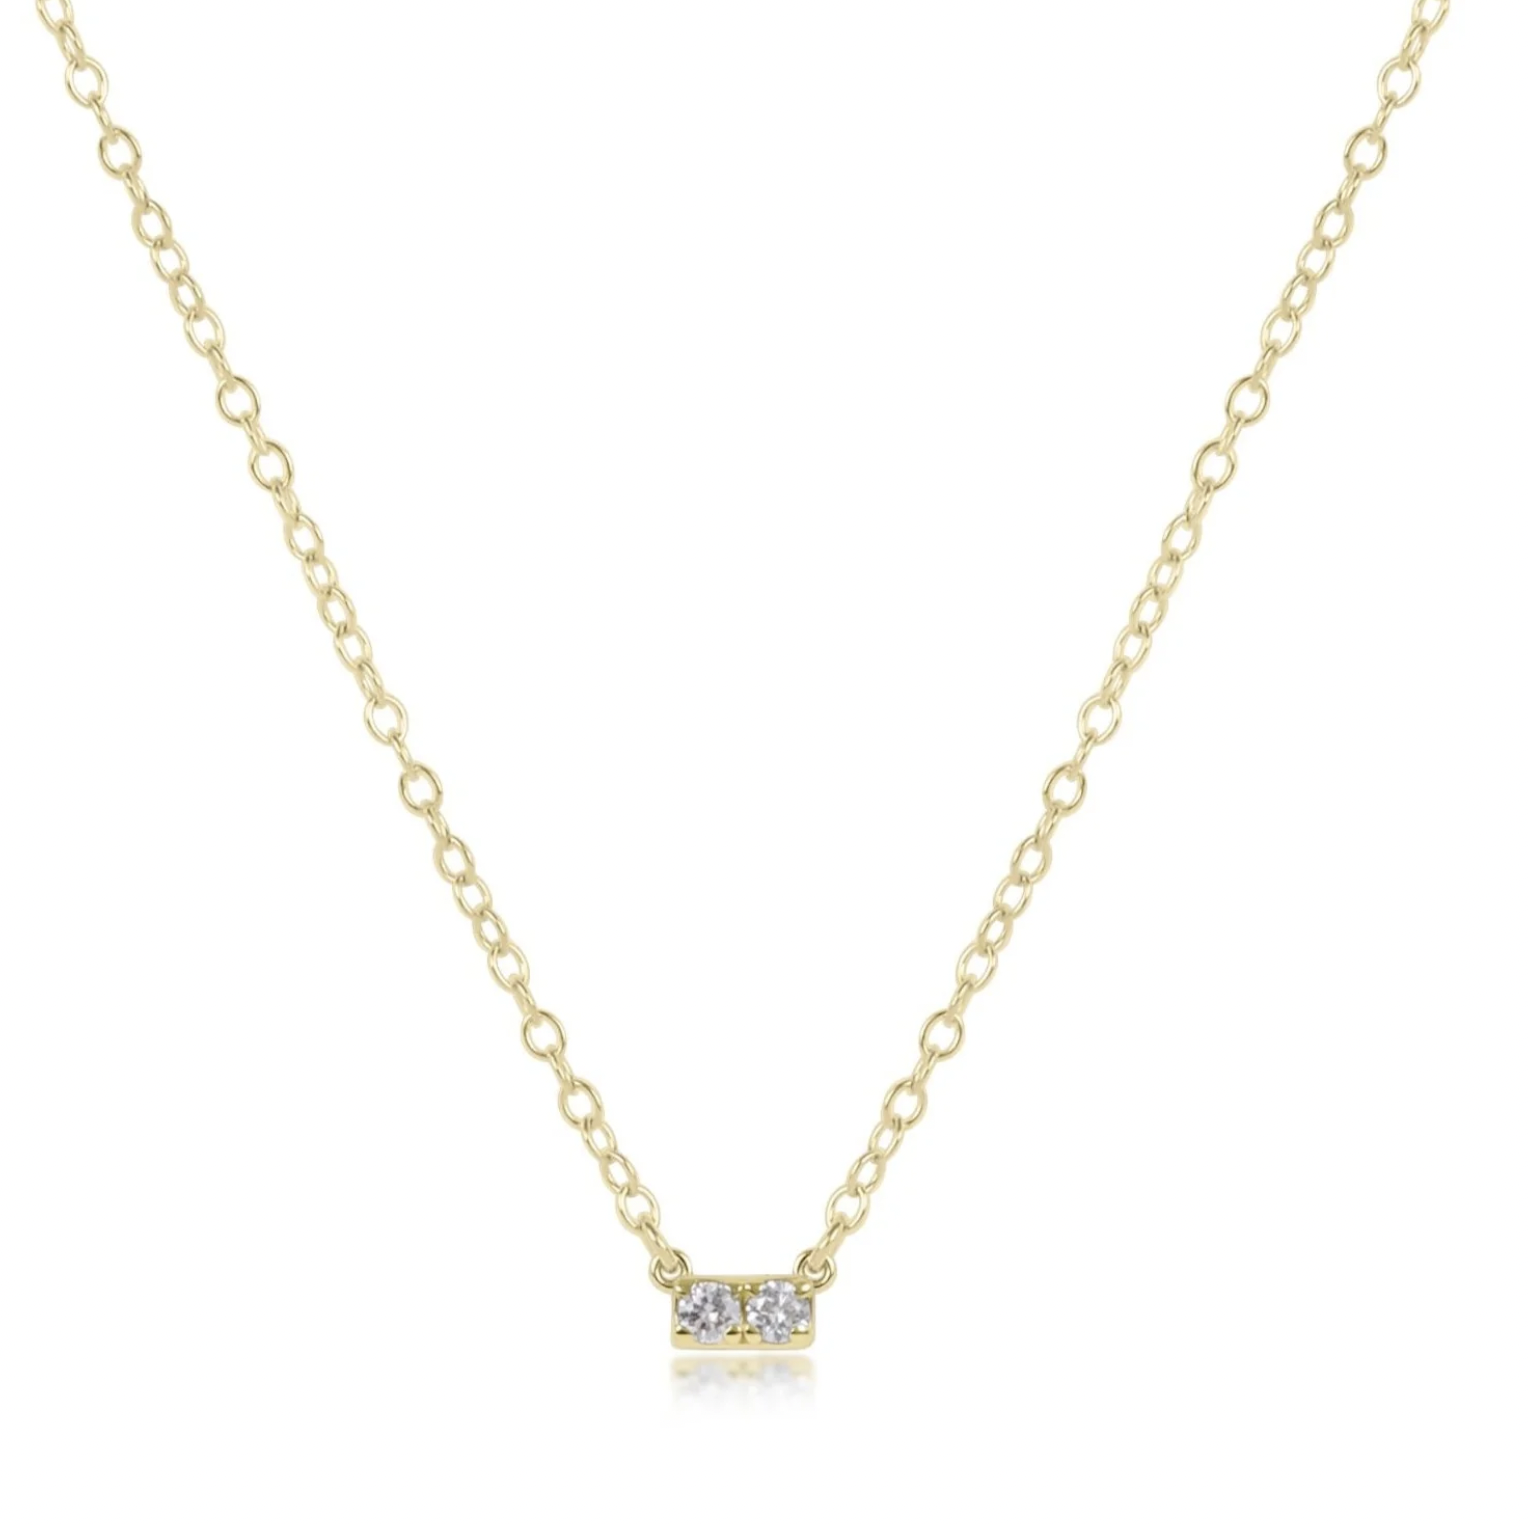 ENEWTON 14kt Gold and Diamond Significance Bar Necklace-Two Diamonds